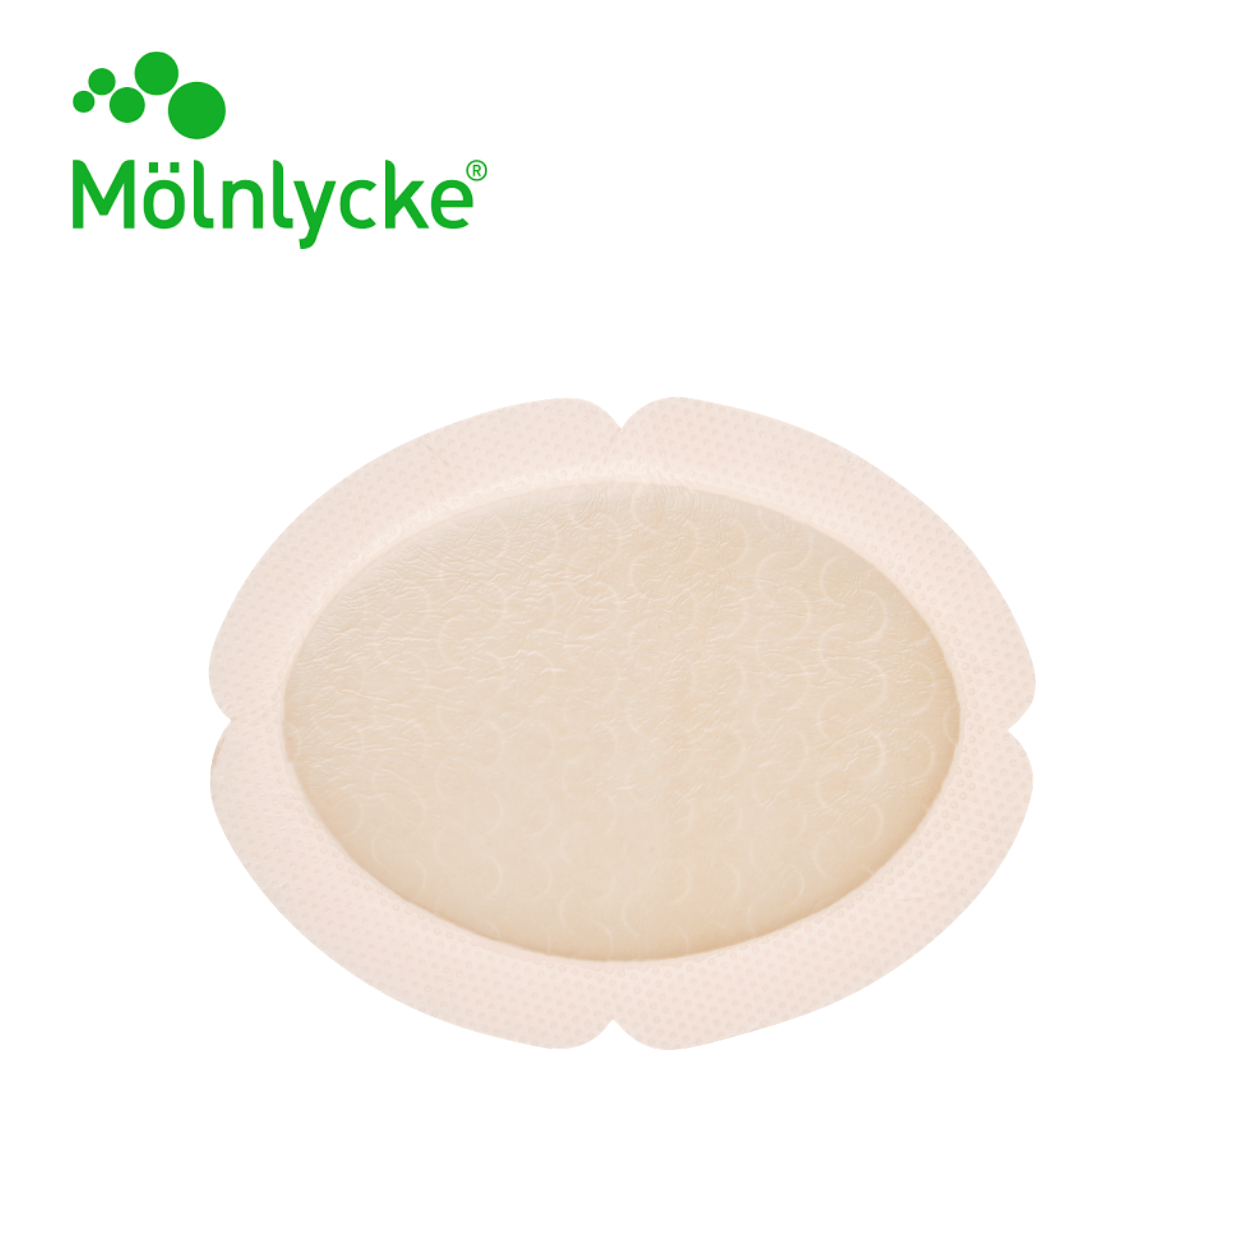 Molnlycke Products (15)